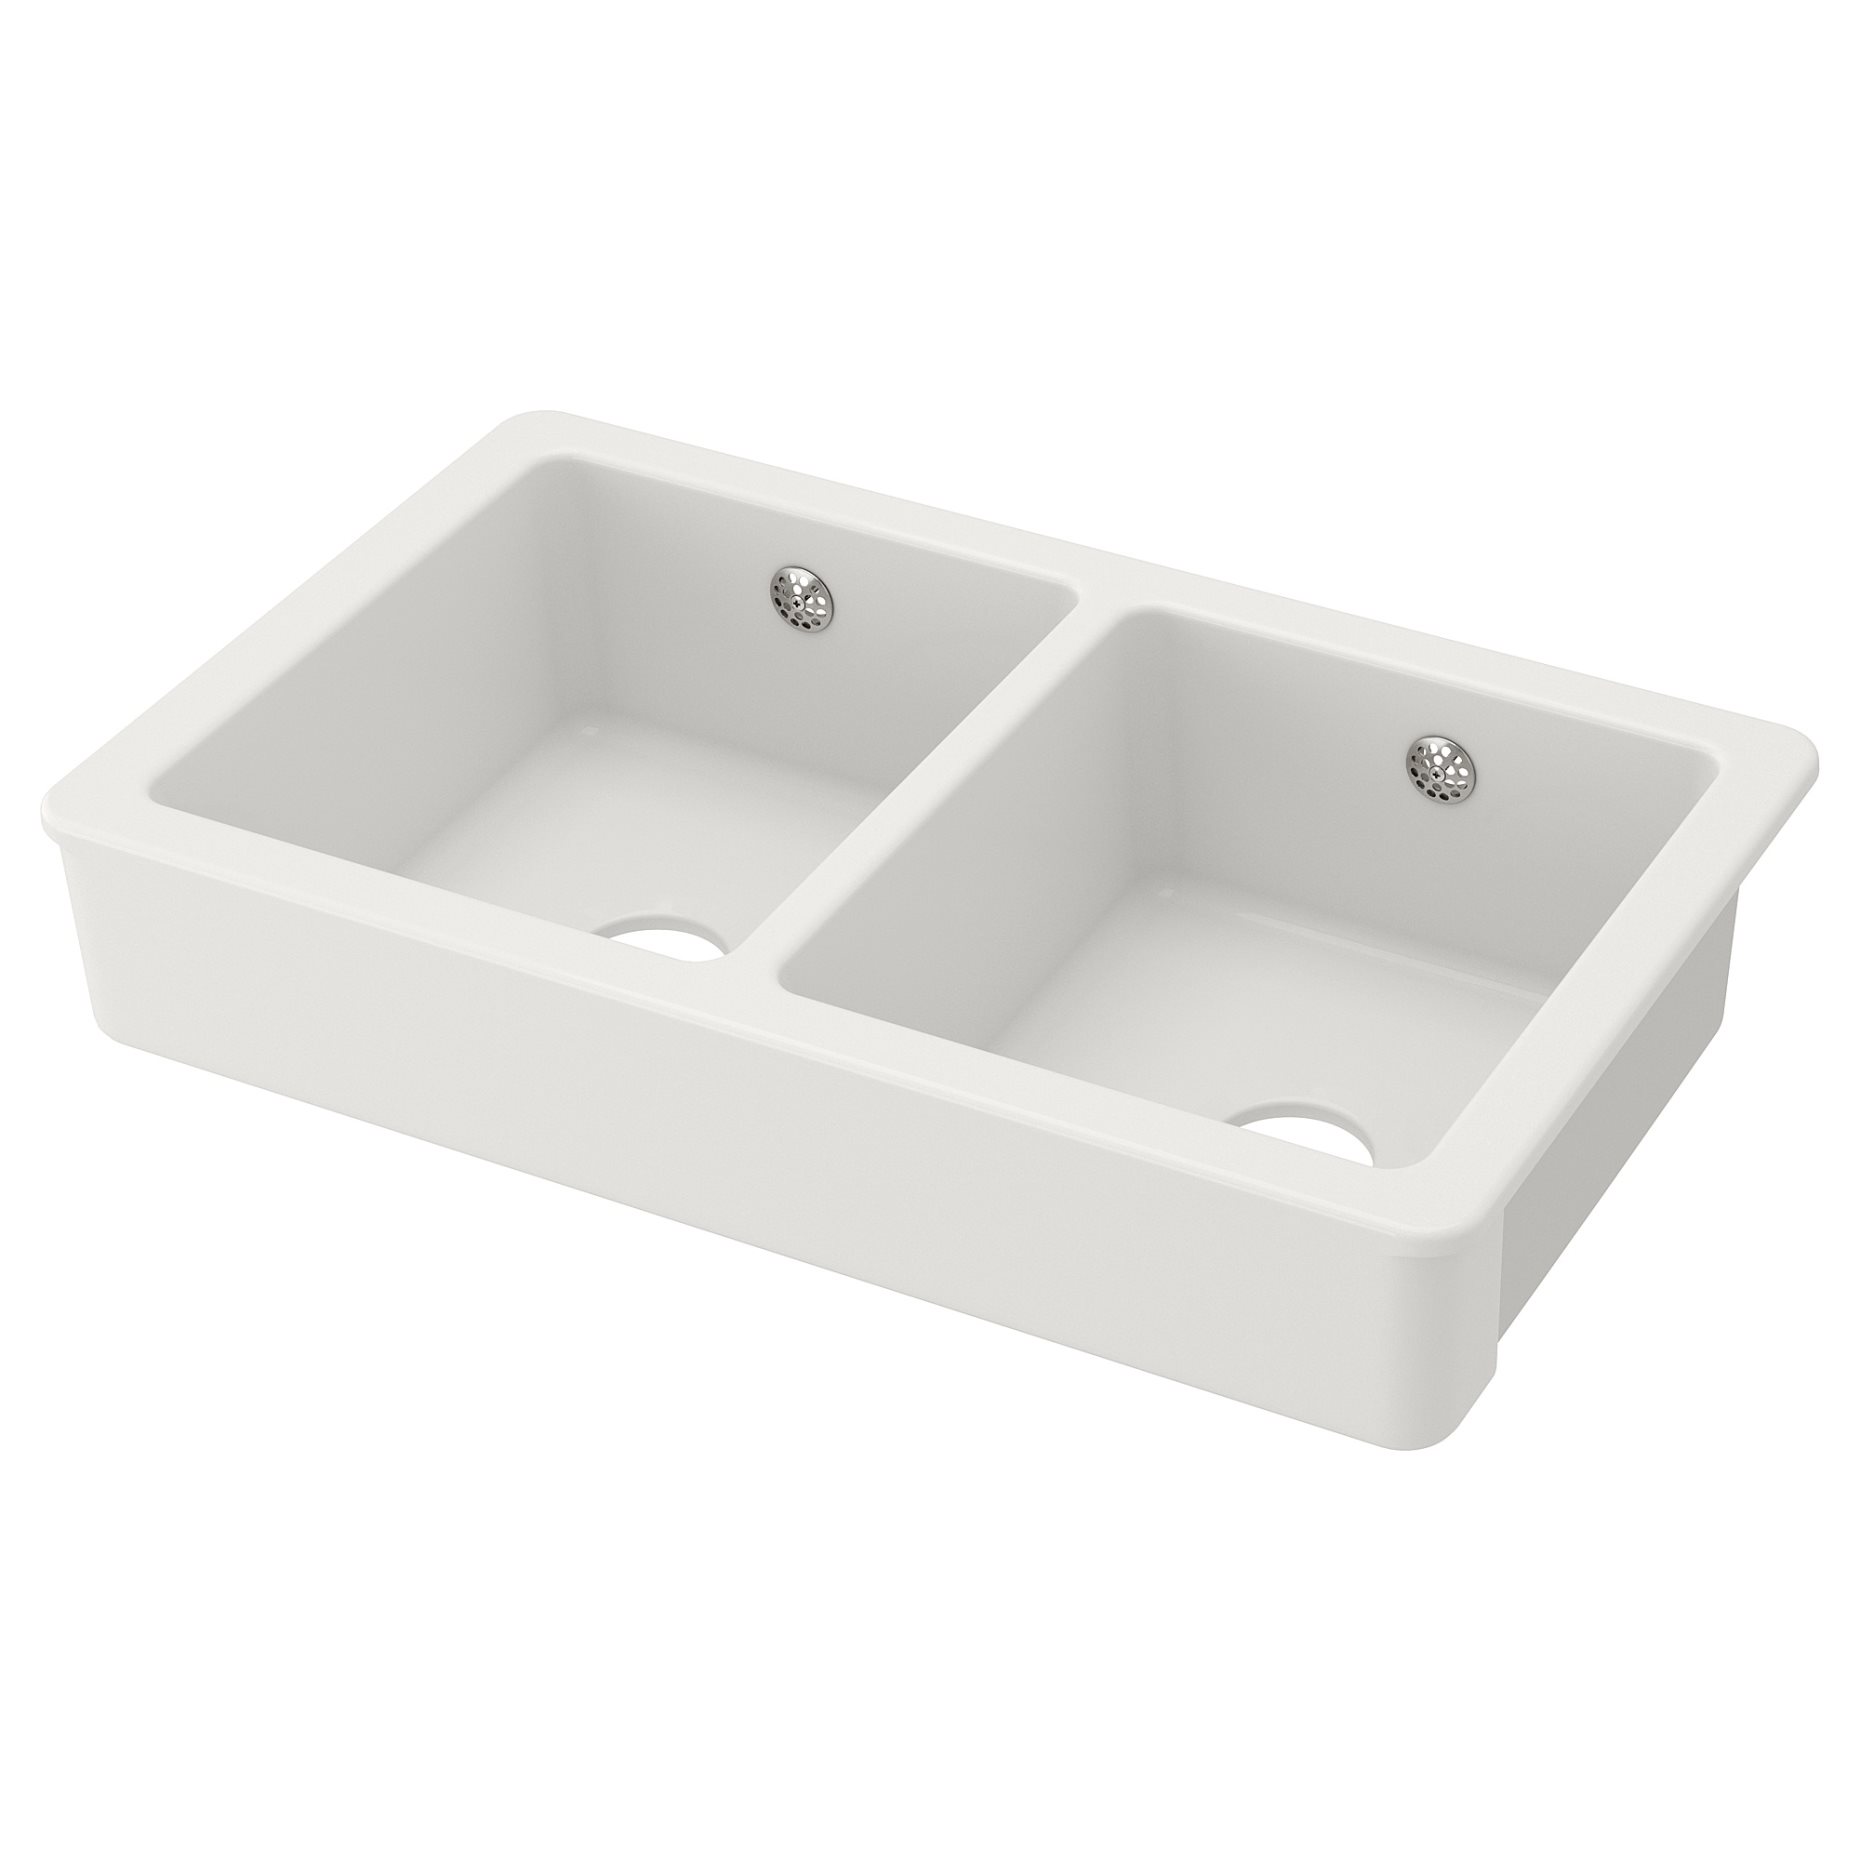 HAVSEN, sink bowl, 2 bowls with visible front, 903.592.16